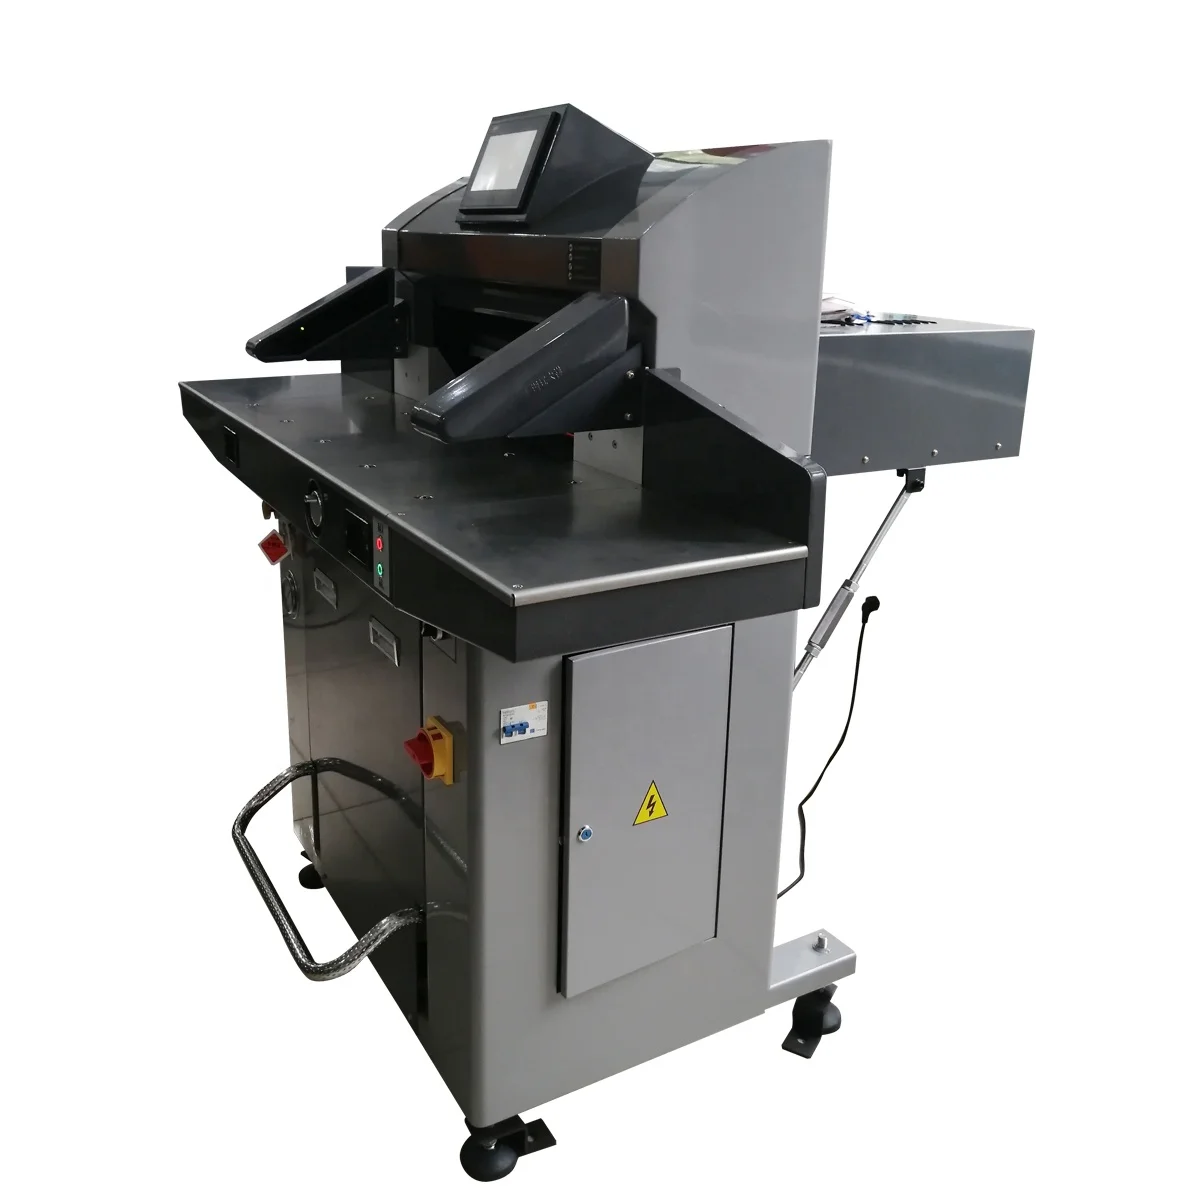 
H520S Stainless steel countertop silent hydraulic 520mm guillotine paper cutter machine with Side table 